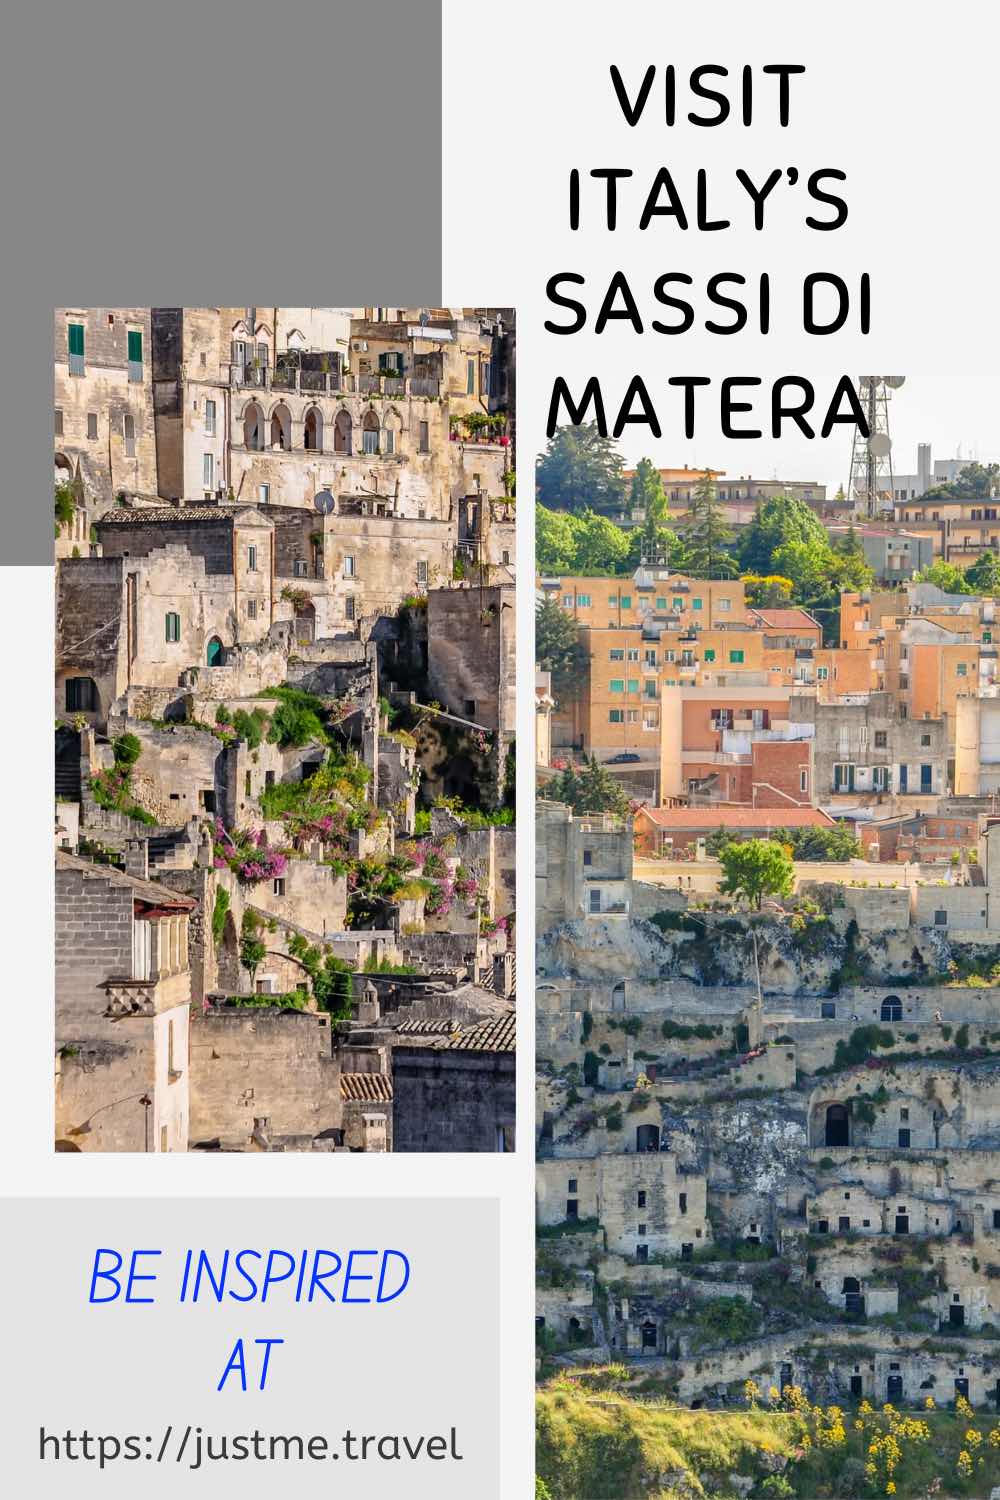 The image has two photos that show a troglodyte settlement. One photo is bathed in sunlight with purple flowers and green shrubs. The second photo shows abandoned cave homes below a modern city. The image invites you to visit Italy's Sassi di Matera.